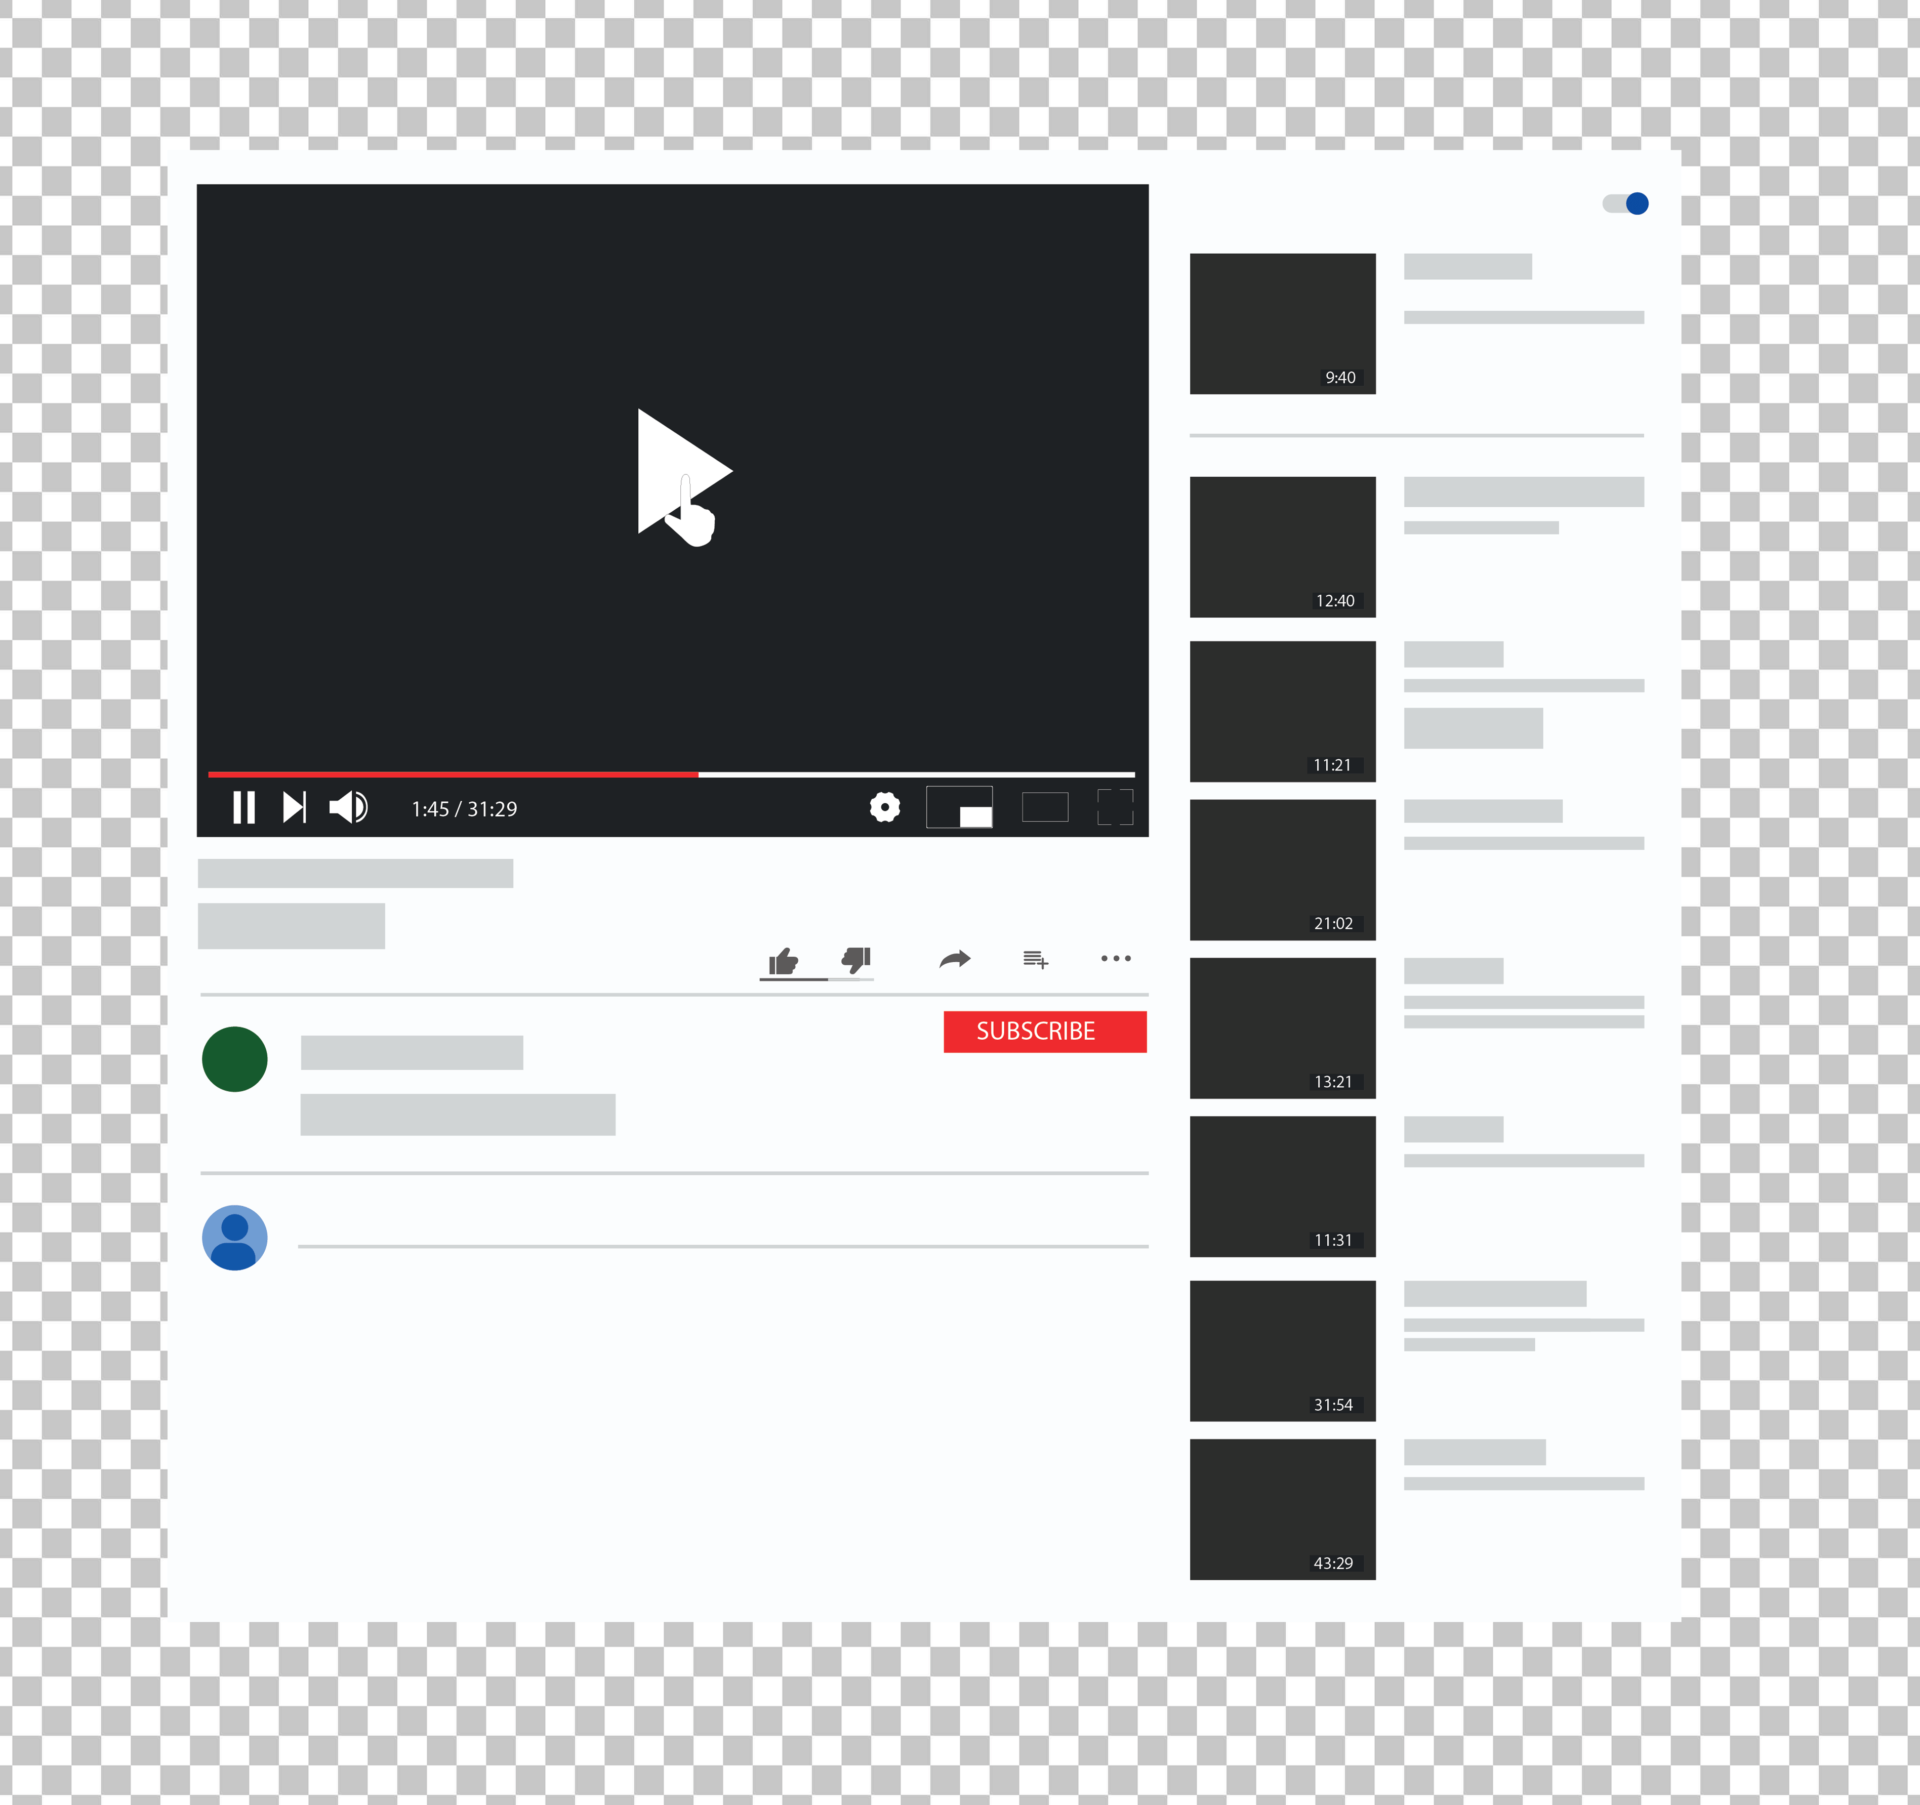 YouTube Video Interface, Youtube video template PNG Image